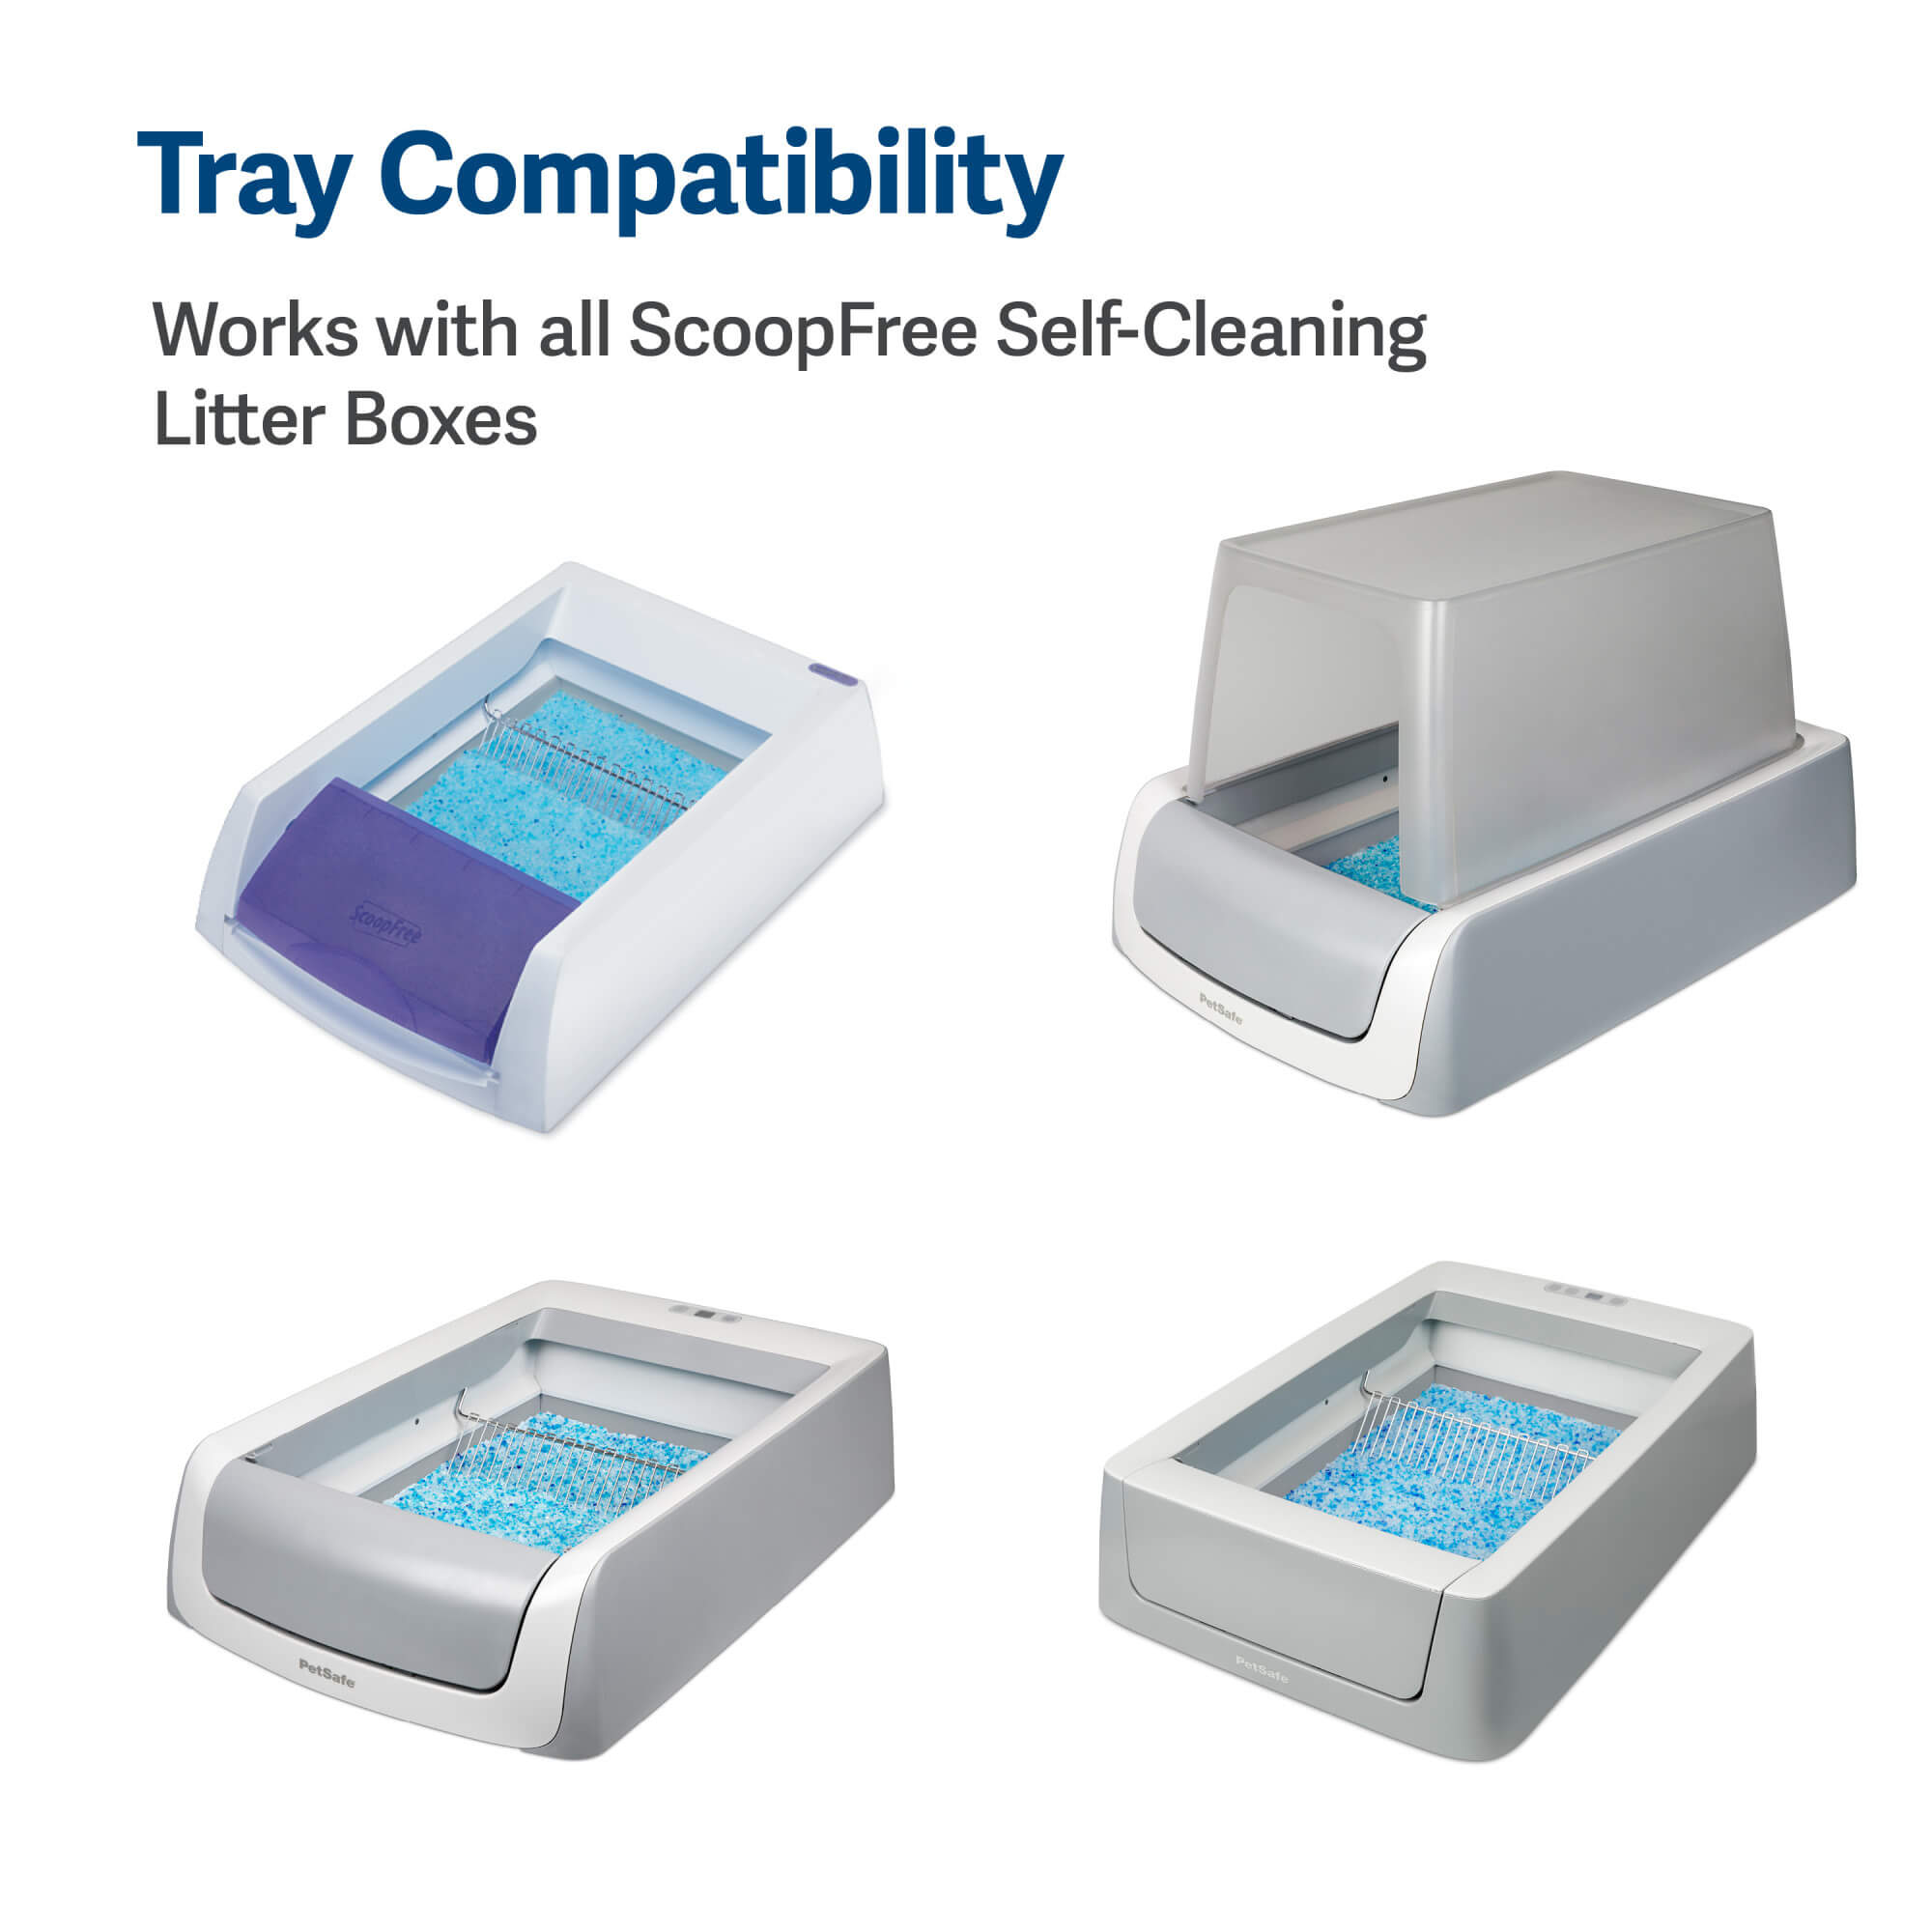 tray compatibility works with all scoopfree self-cleaning litter boxes